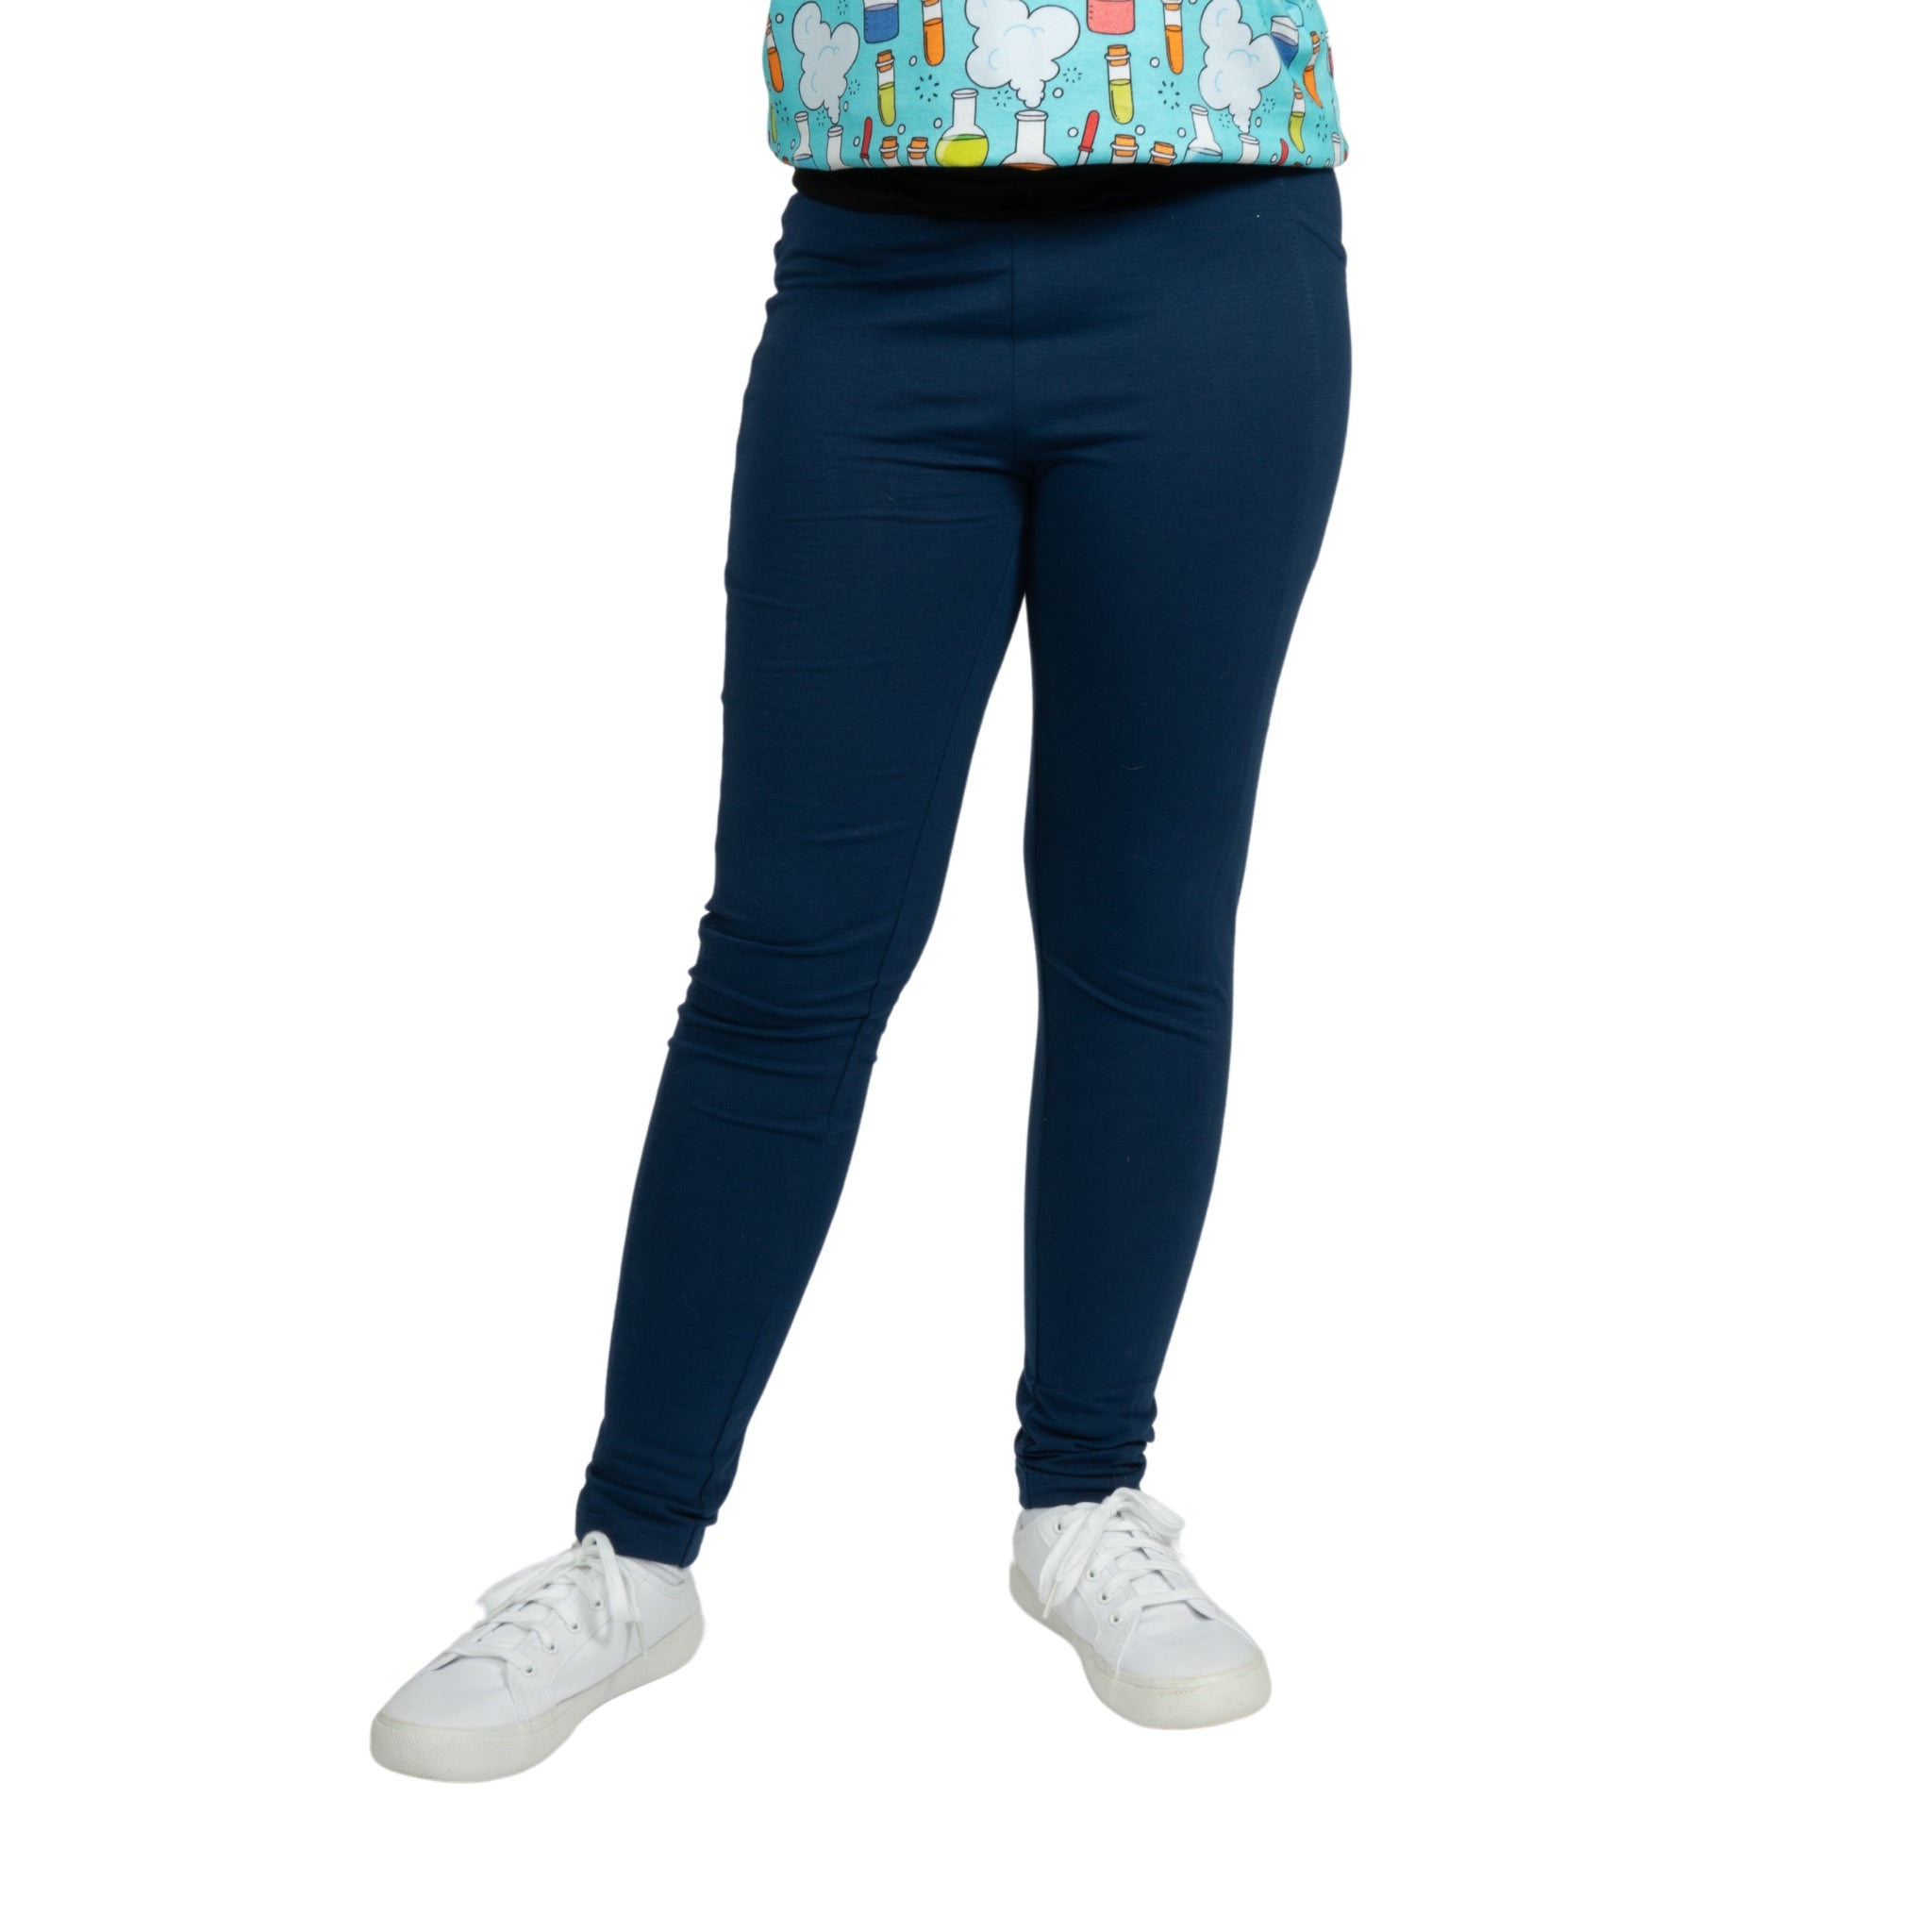 Navy Blue Kids Leggings with Pockets